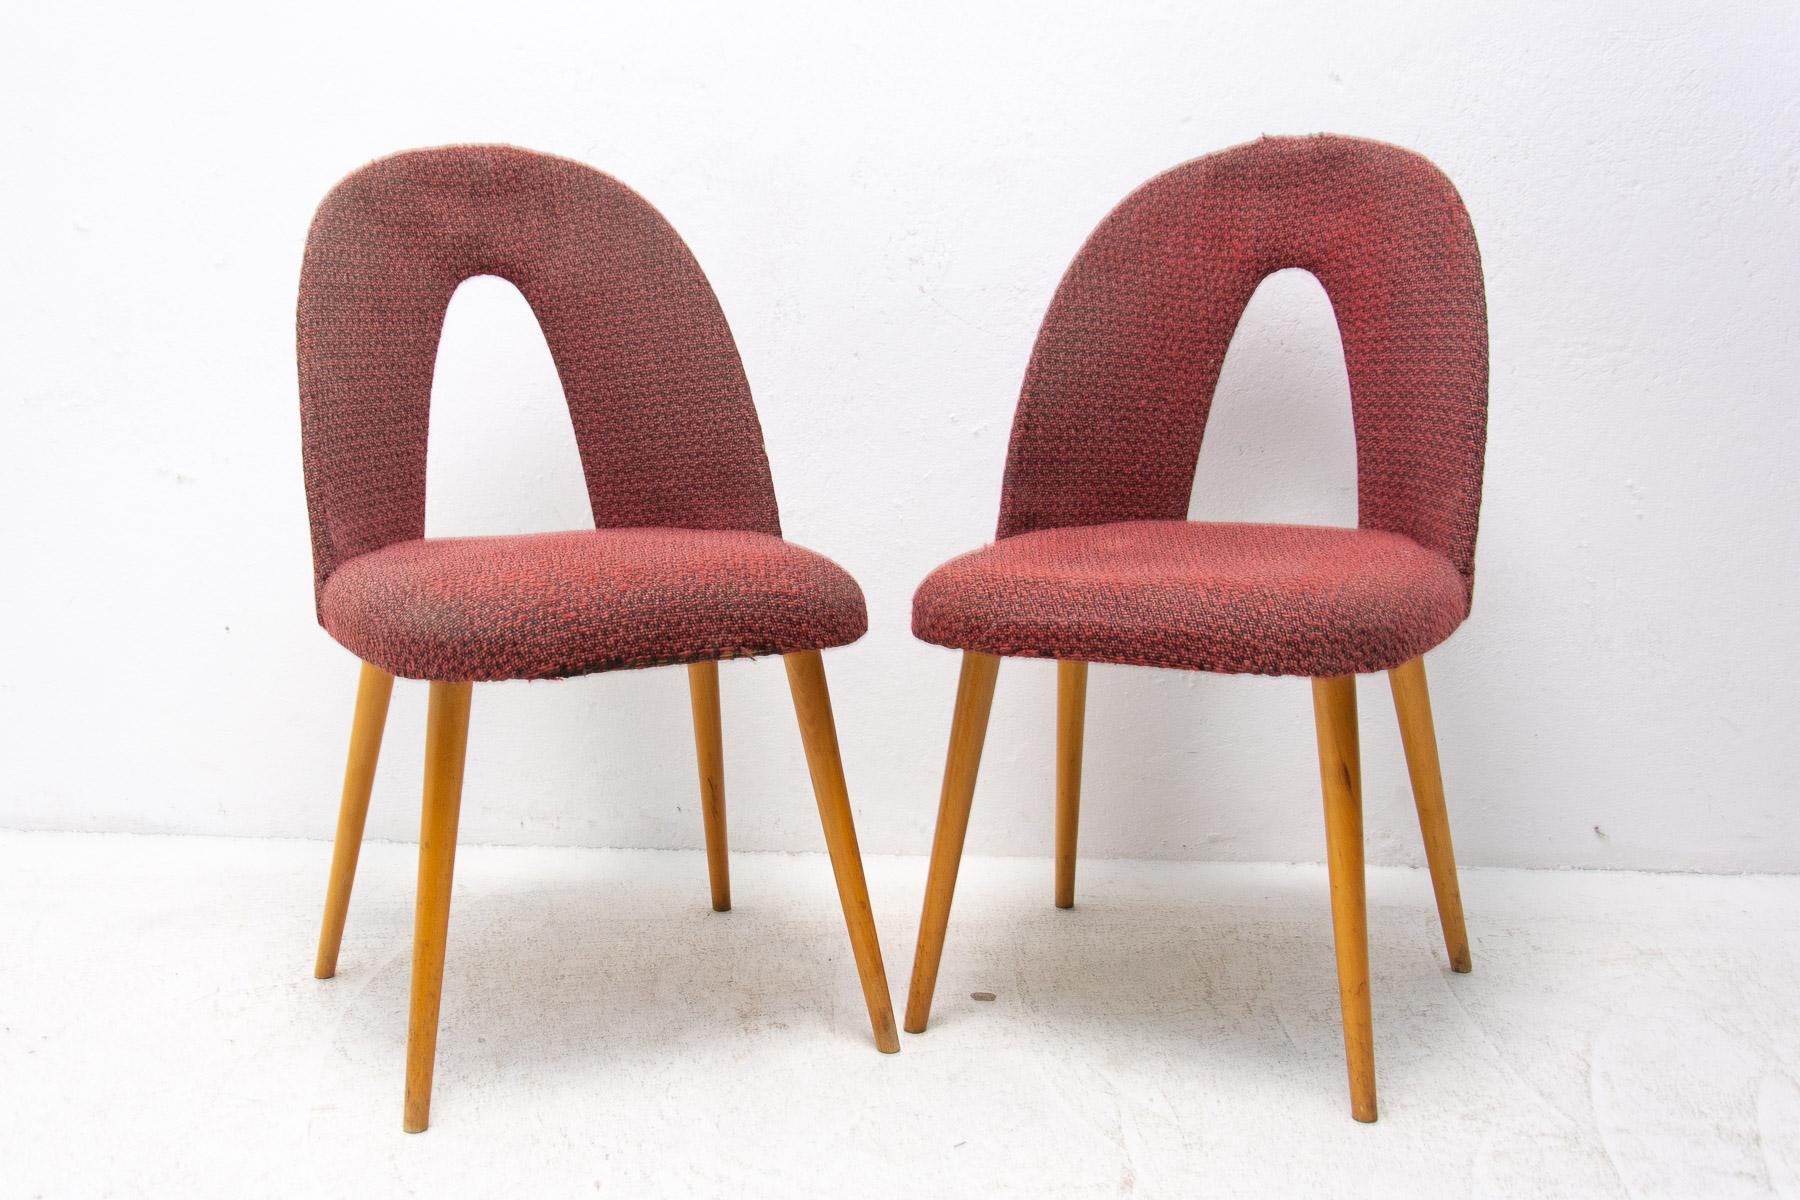 Bentwood dining chairs designed by Antonin Suman. The chairs are upholstered with fabric and made of bent plywood and beech wood. Made in the former Czechoslovakia in the 1960´s. The chairs are structurally in good vintage condition, but the fabric